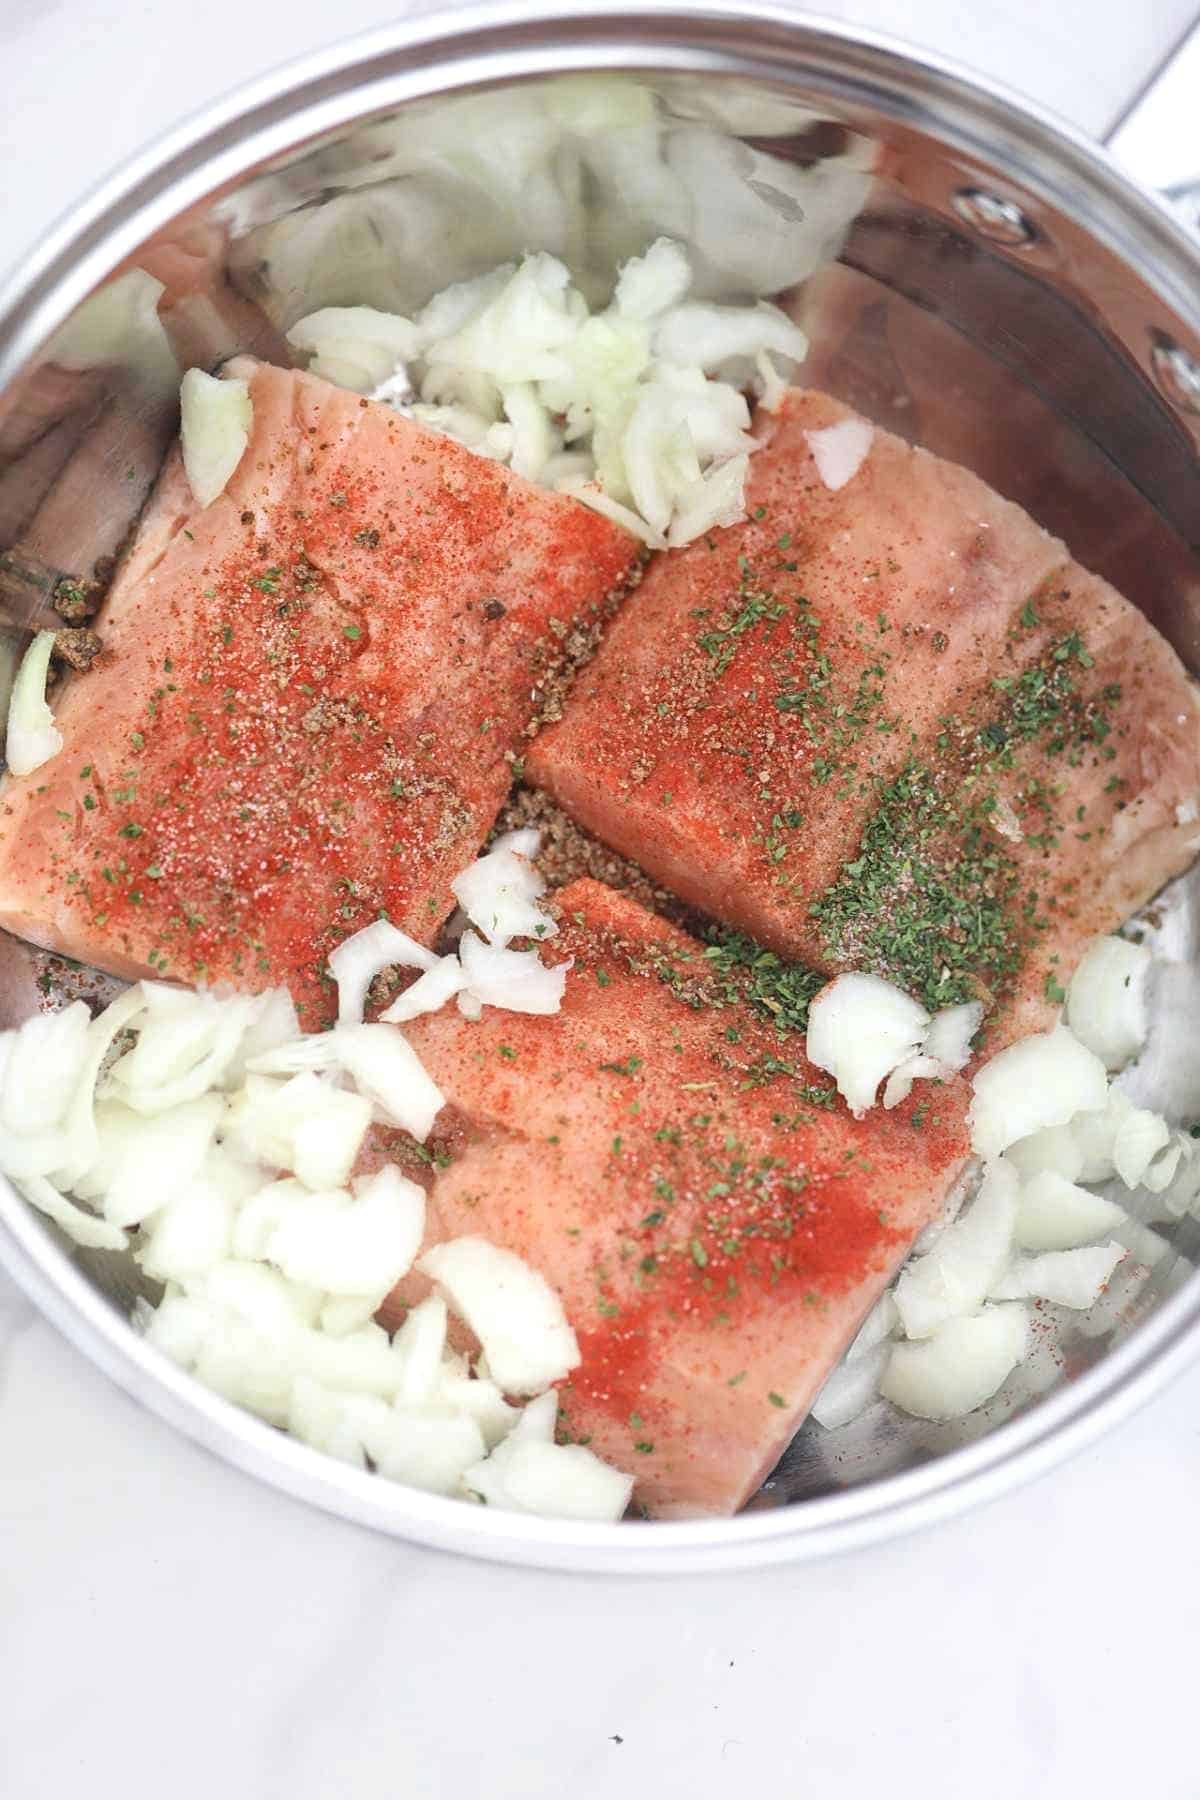 fish fillets and other ingredients in a pot.